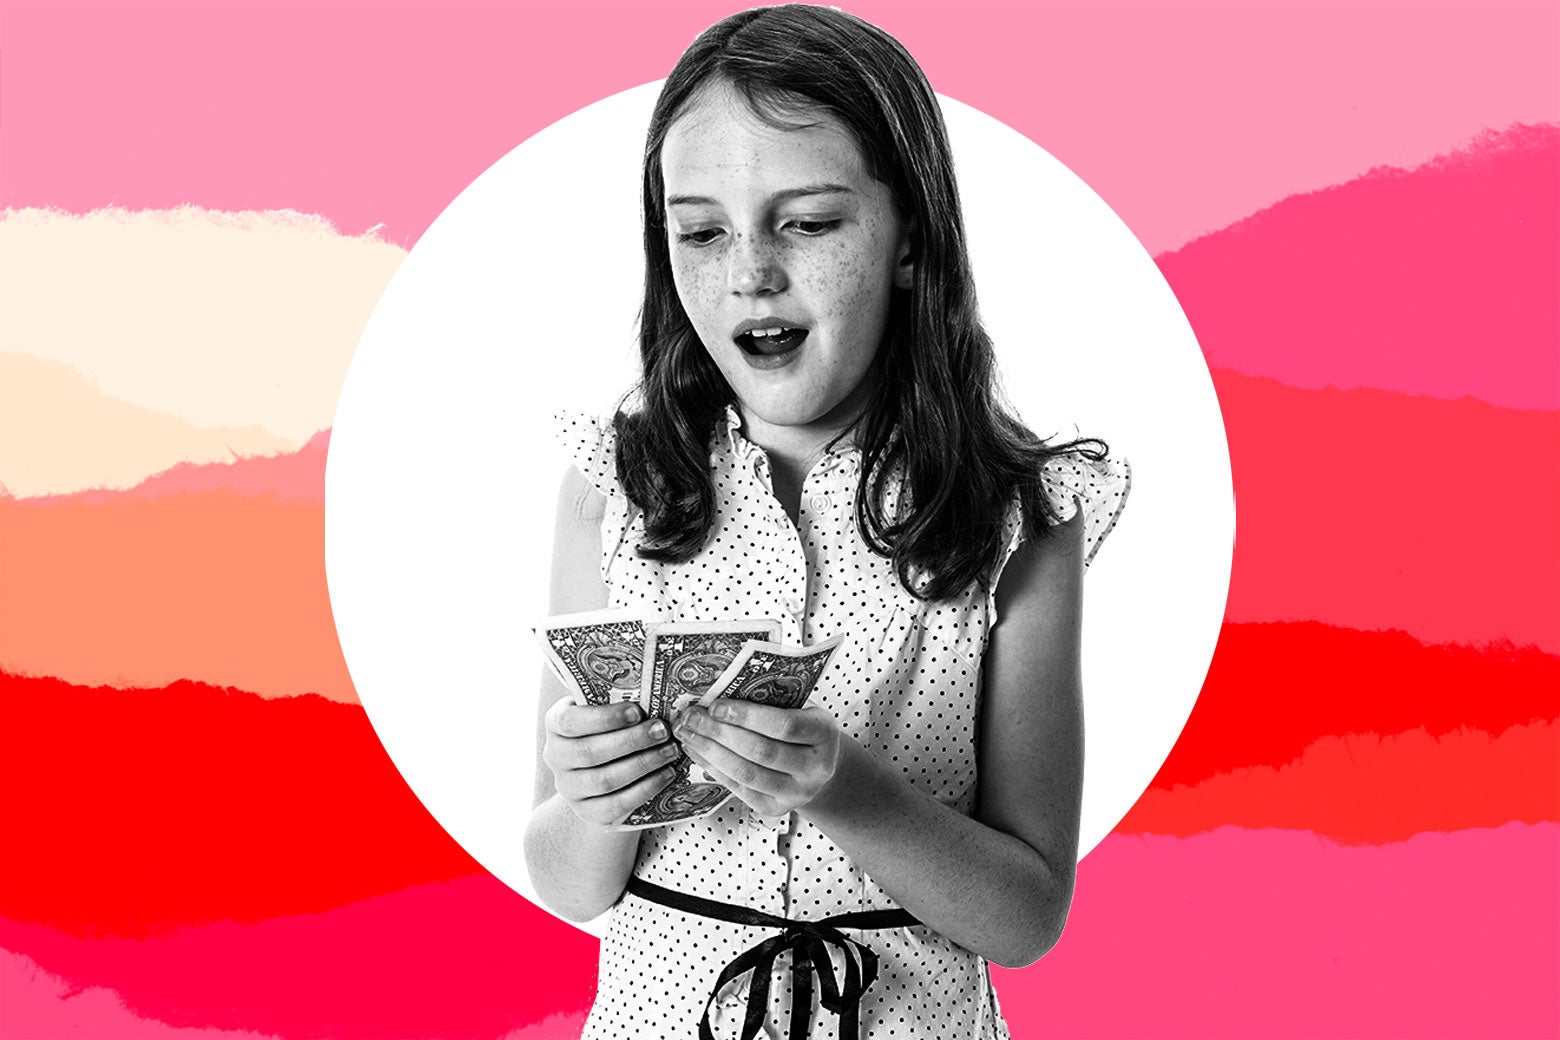 A young girl counts money.